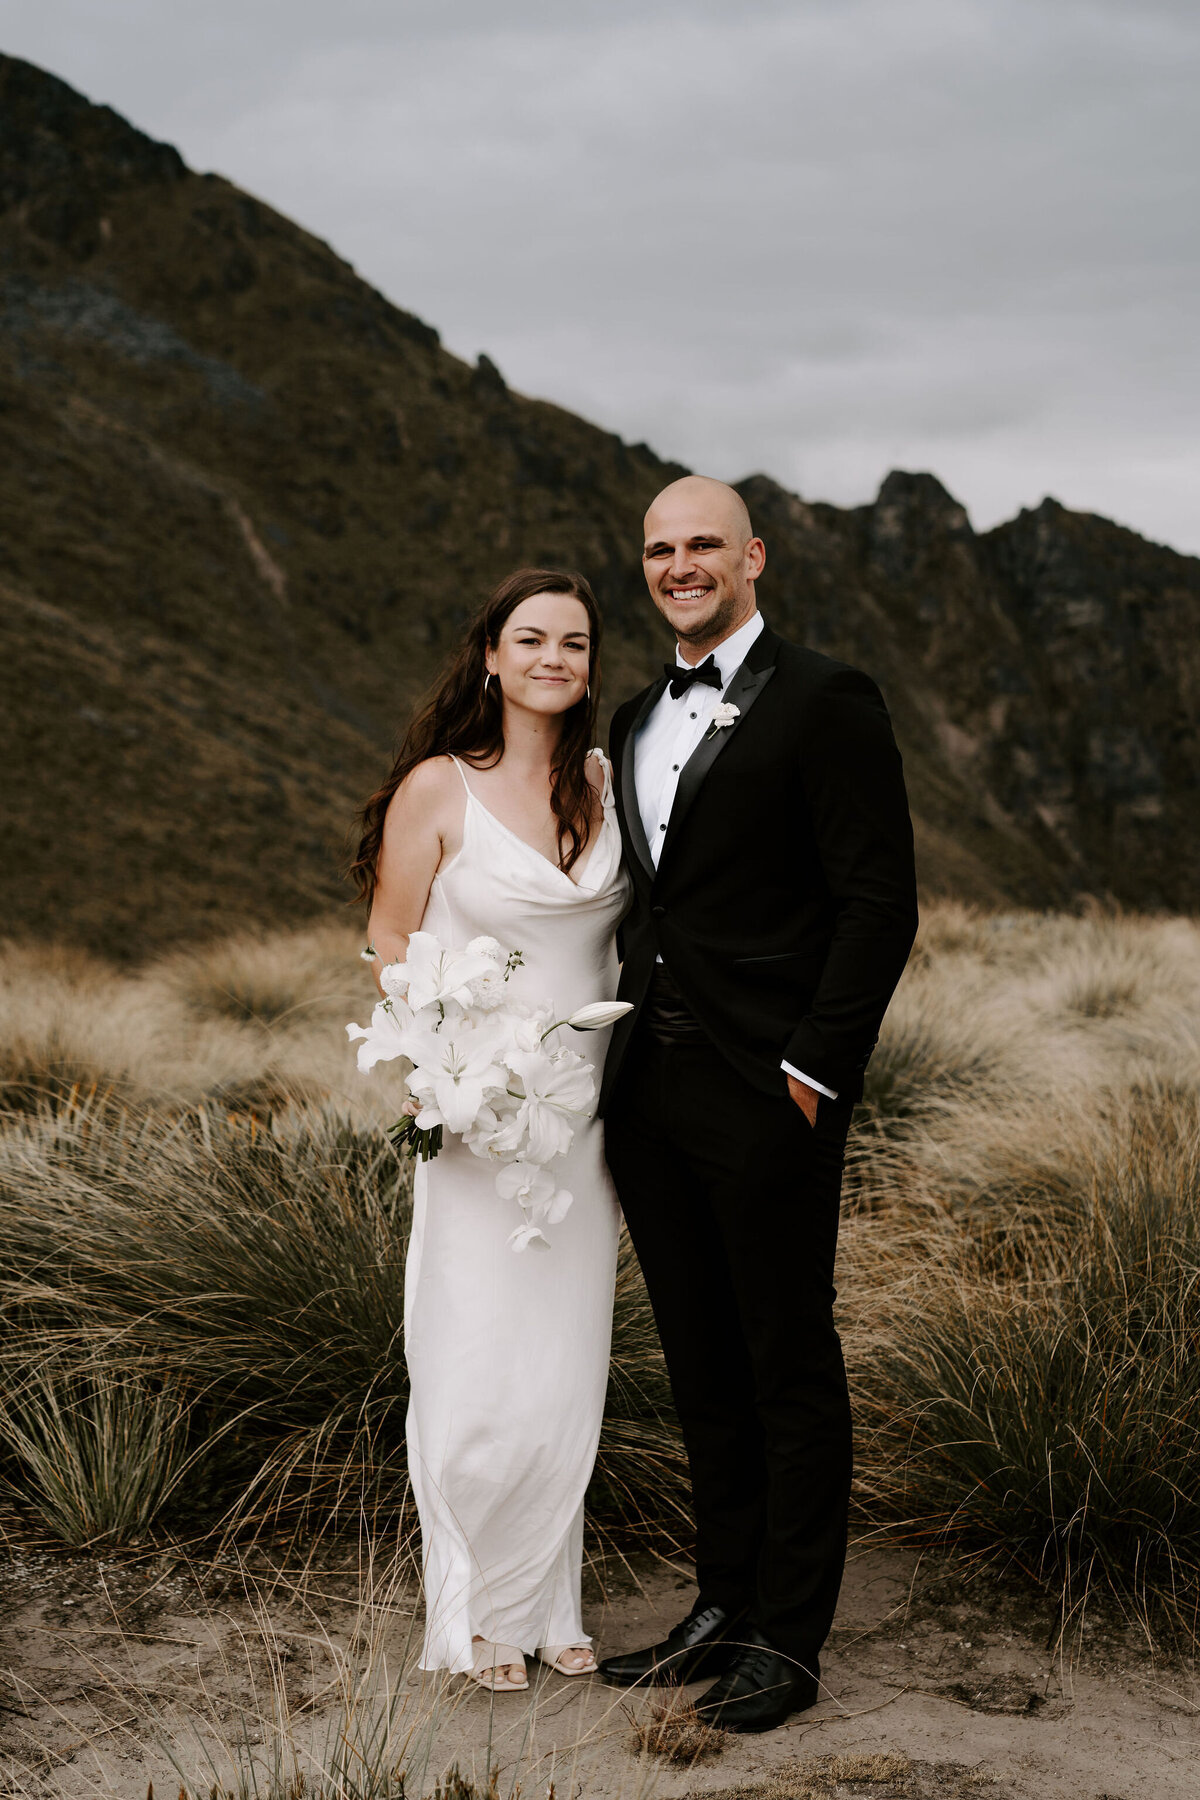 The Lovers Elopement Co - bride and groom pose in long grass on mountain with lake below, heli wedding